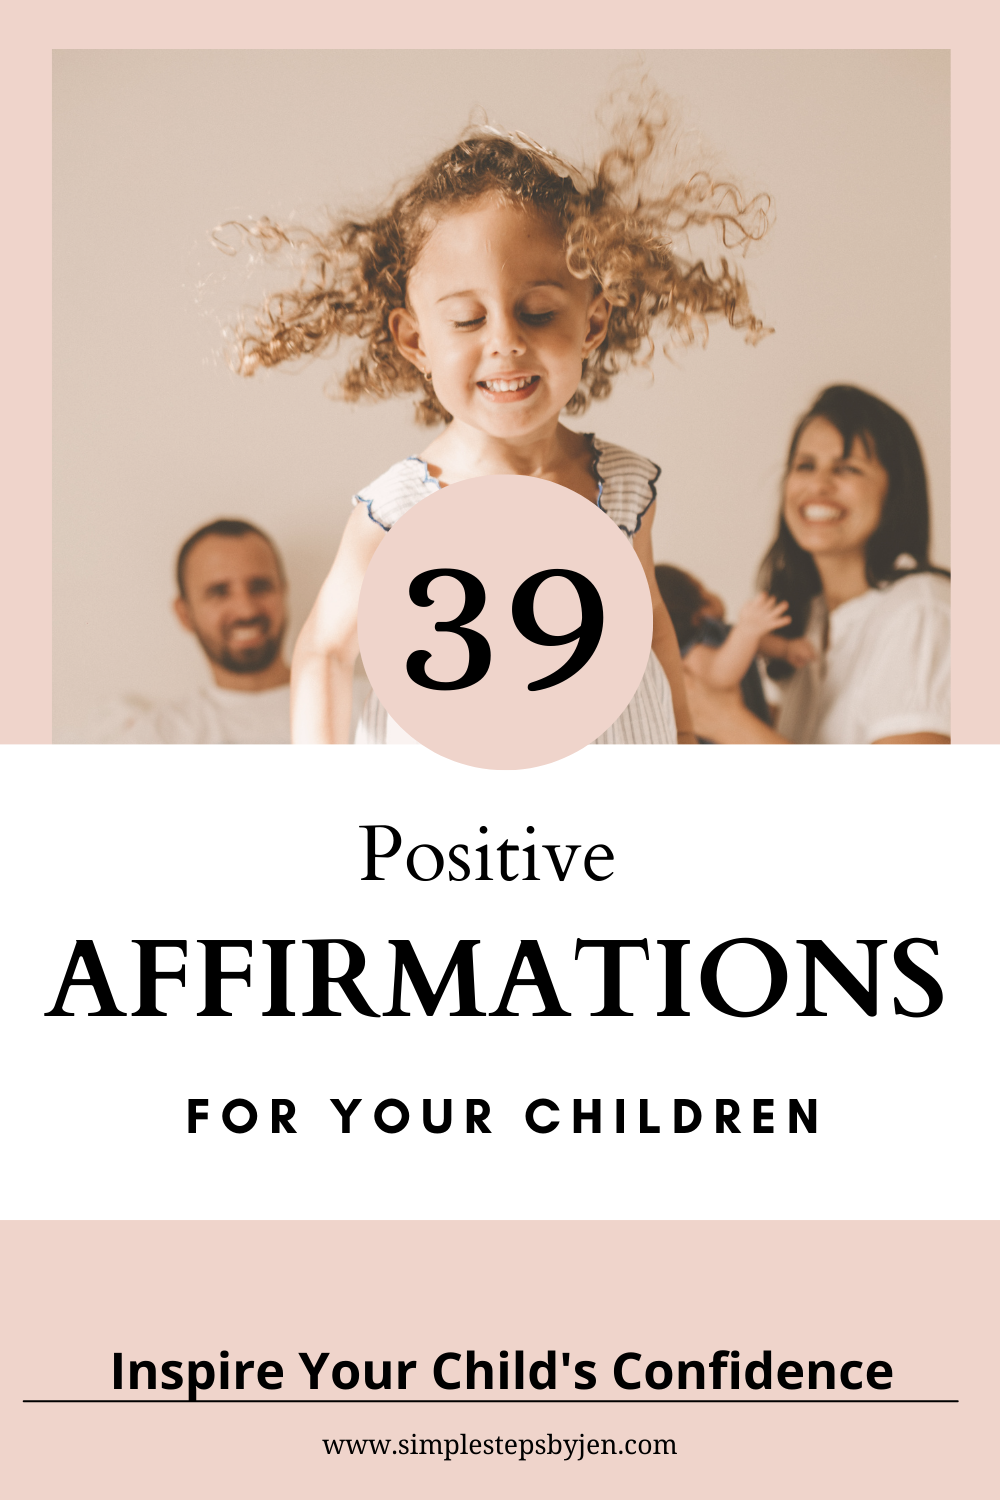 Affirmations for your children